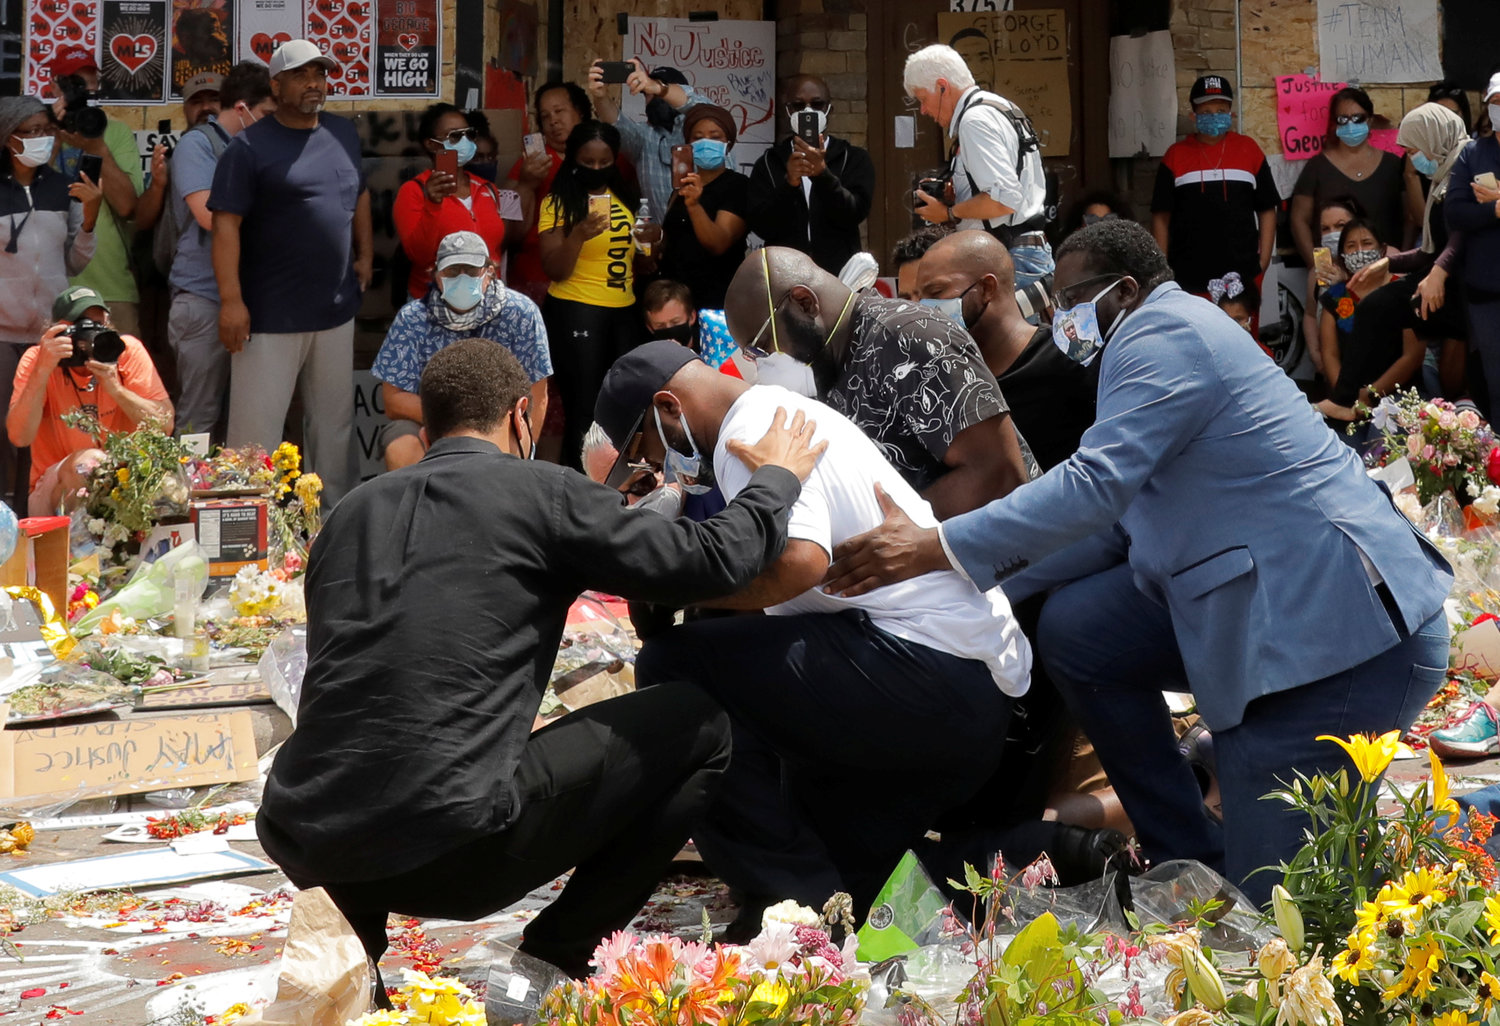 Terrence Floyd, the brother of George Floyd, reacts at a makeshift memorial at the spot where he was taken into custody in Minneapolis June 1, 2020. Demonstrations continue after a white police officer was caught on a bystander's video May 25 pressing his knee into the neck of George Floyd, an African American, who later died at a hospital.